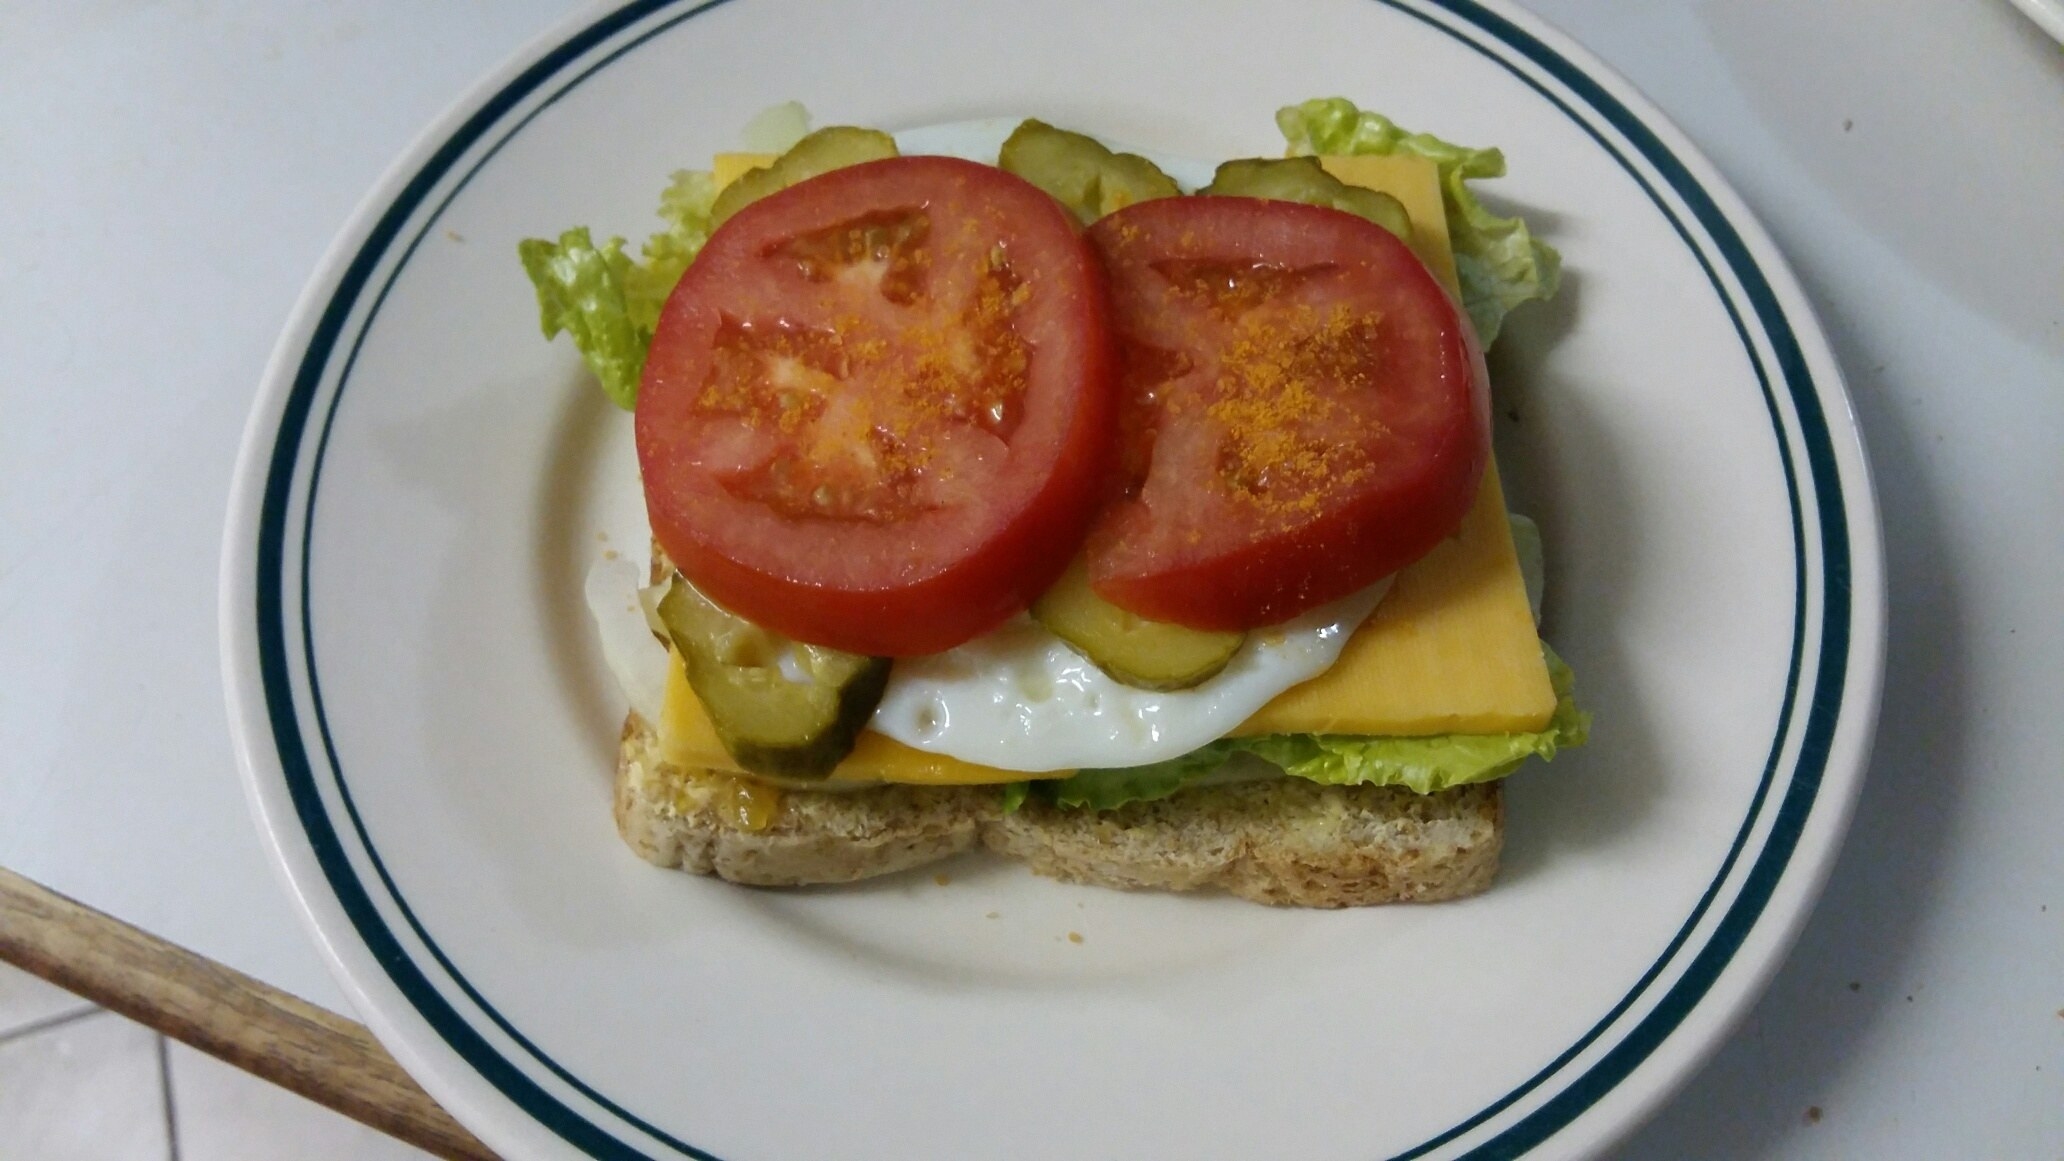 An open-faced sandwich with cheese, tomato, pickles, and lettuce